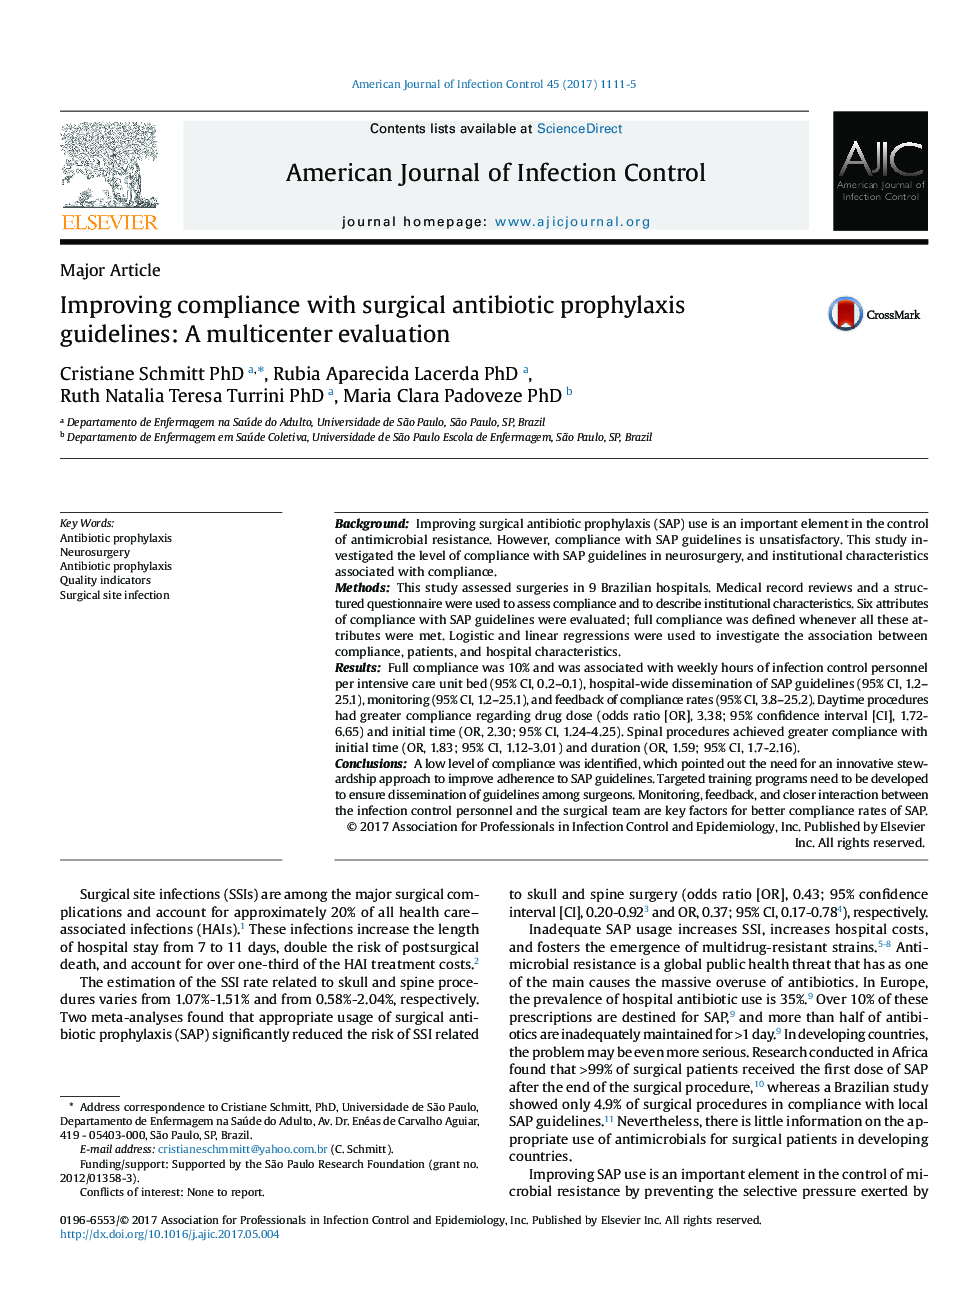 Improving compliance with surgical antibiotic prophylaxis guidelines: A multicenter evaluation